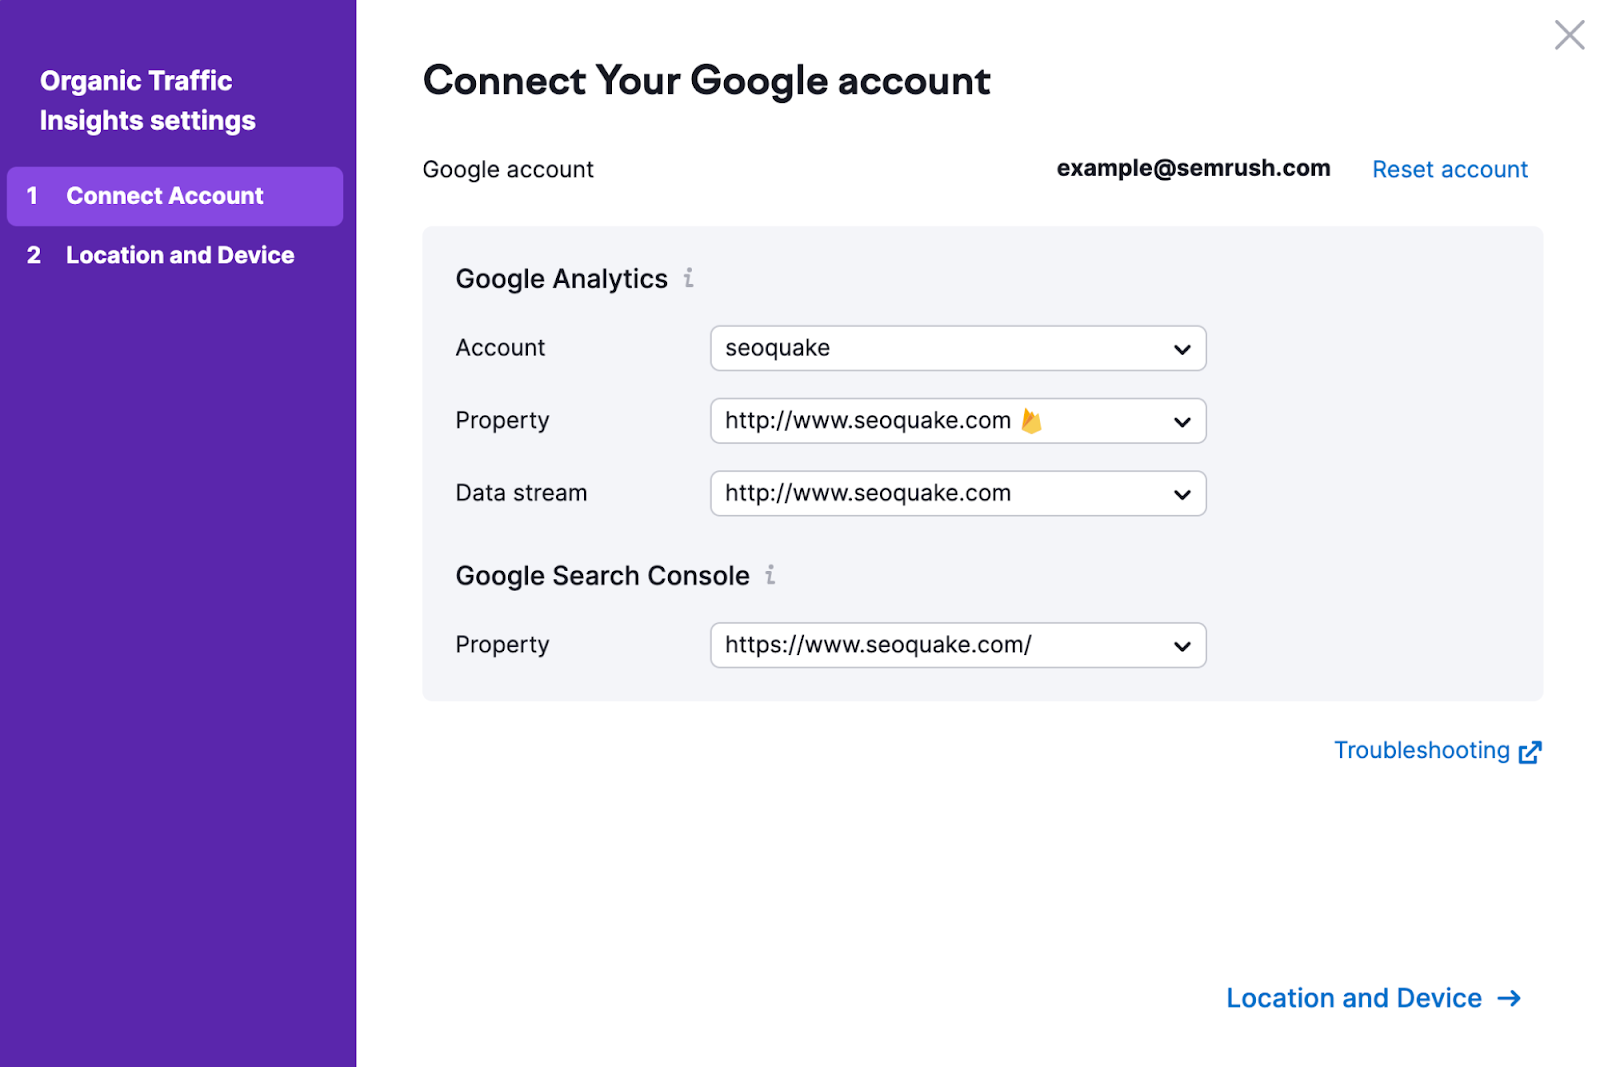 “Connect Your Google account” page